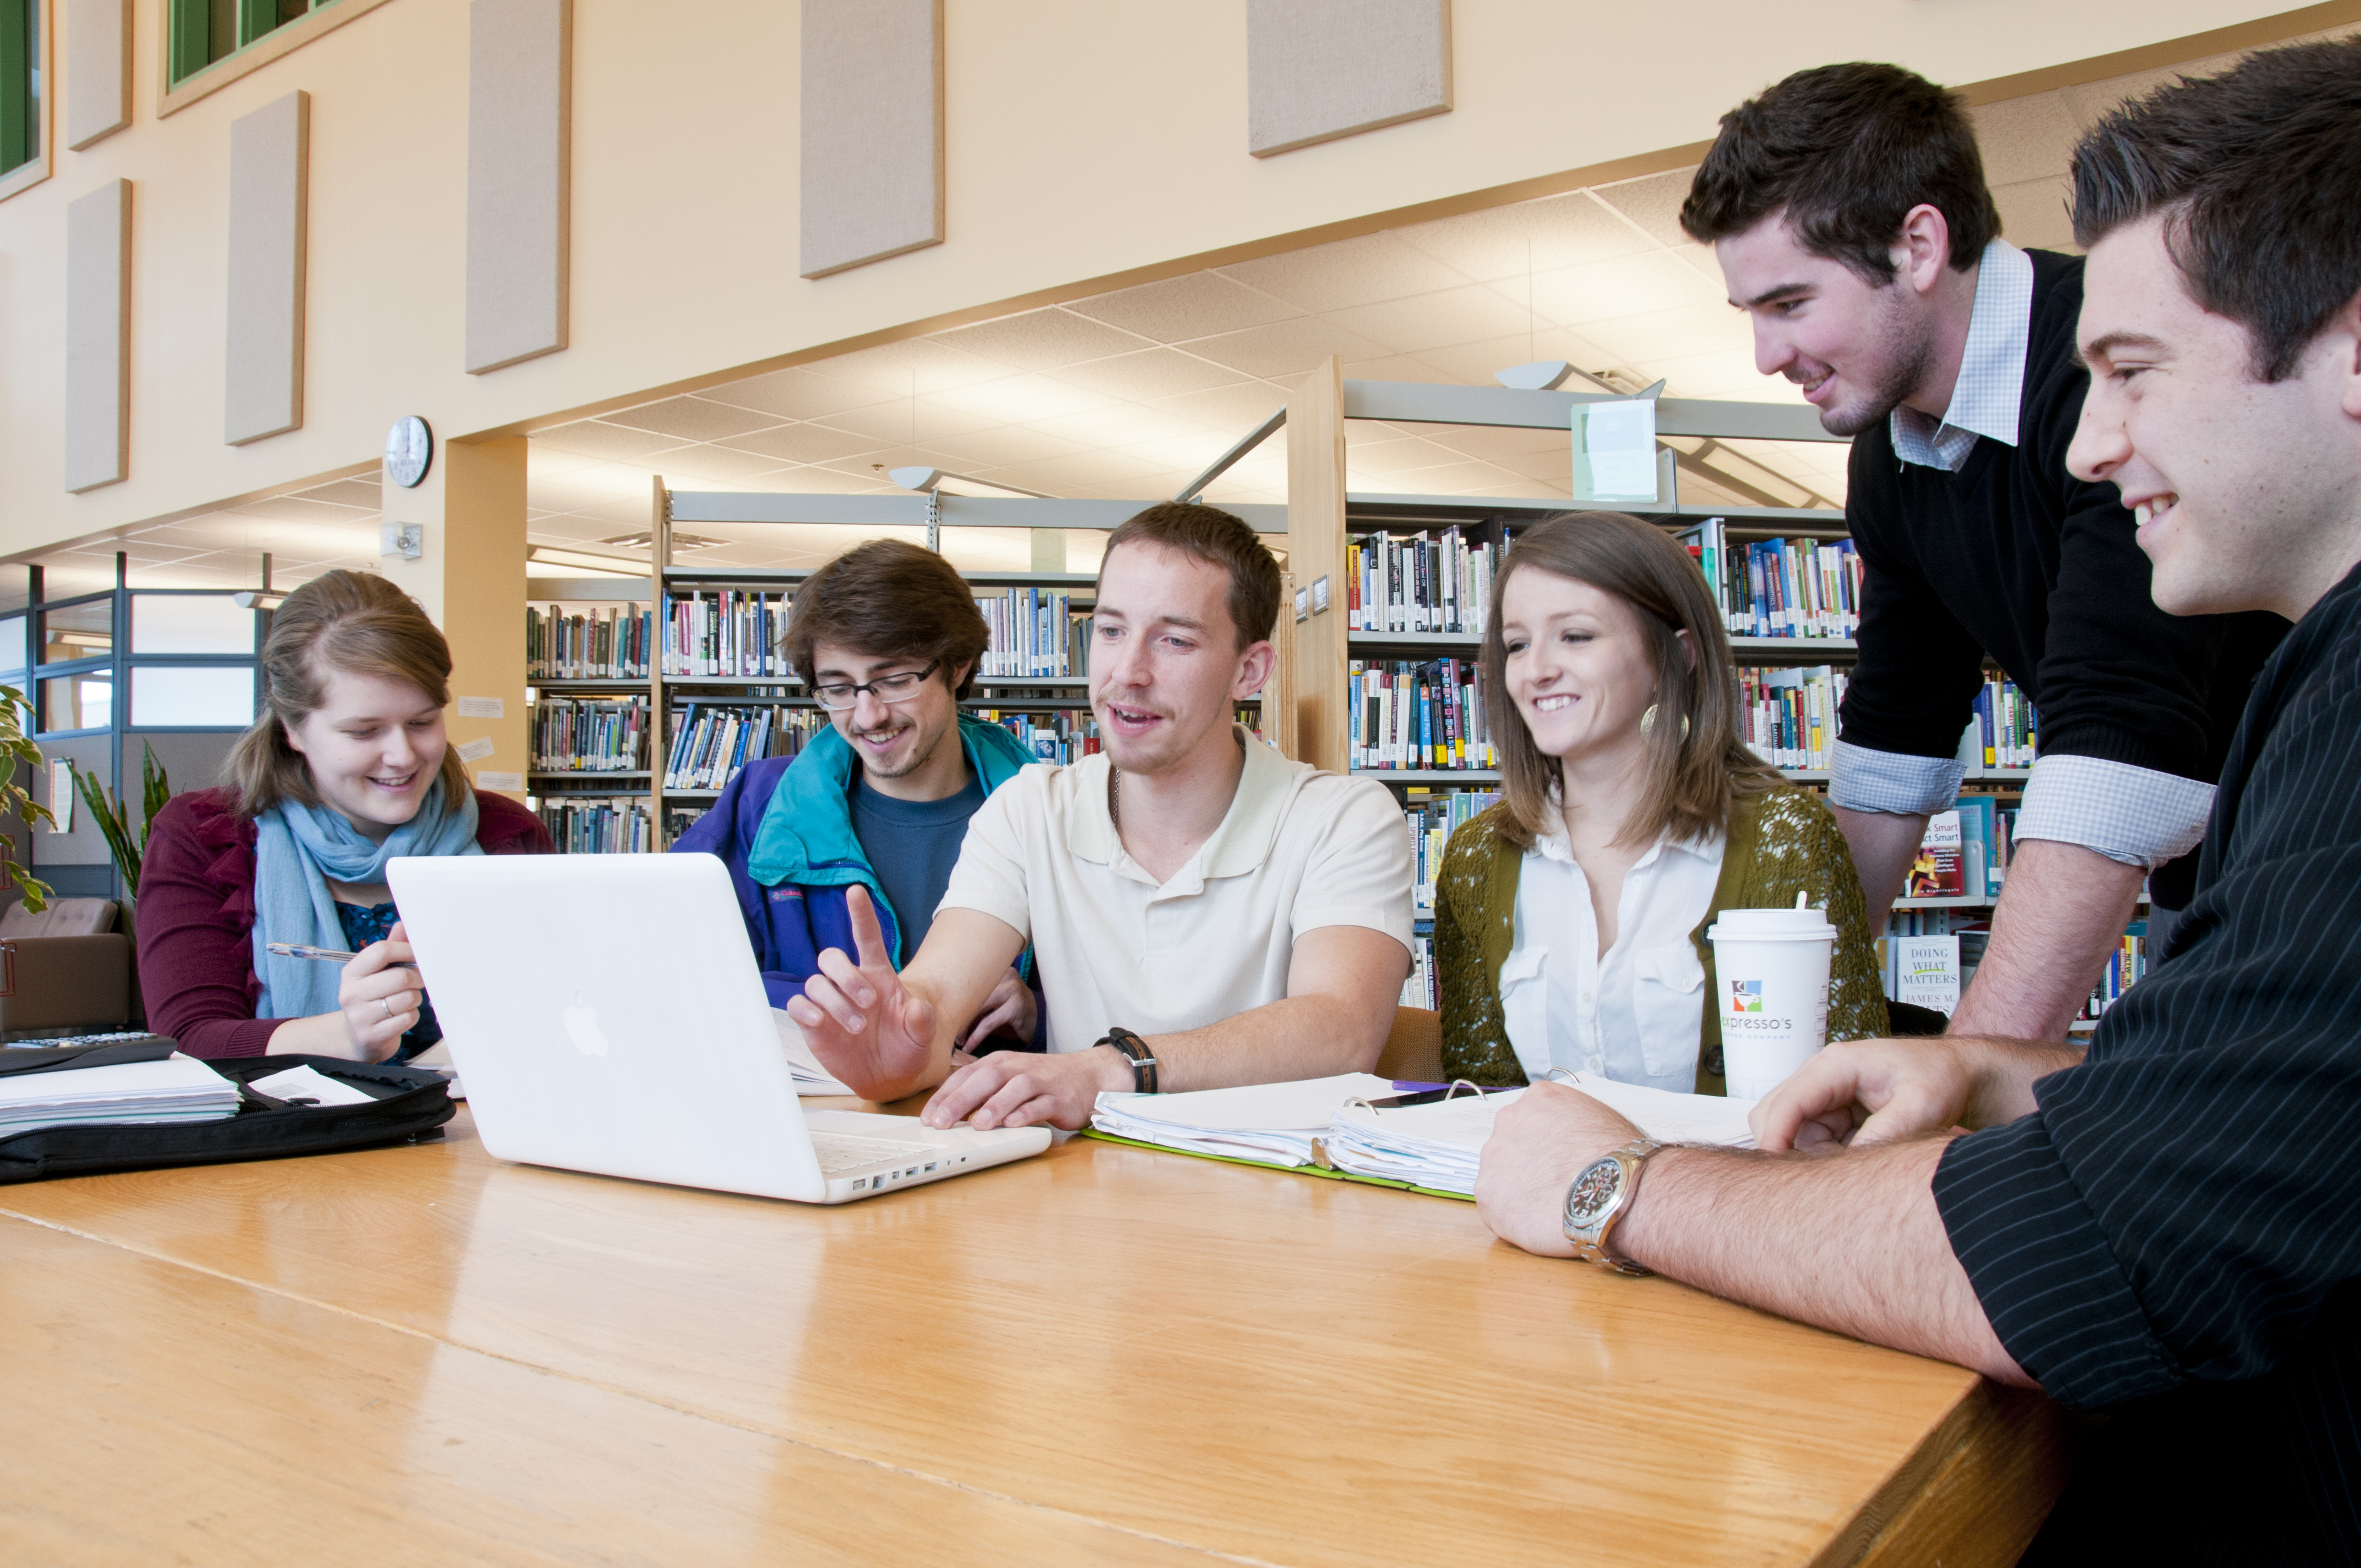 Students working together in the library